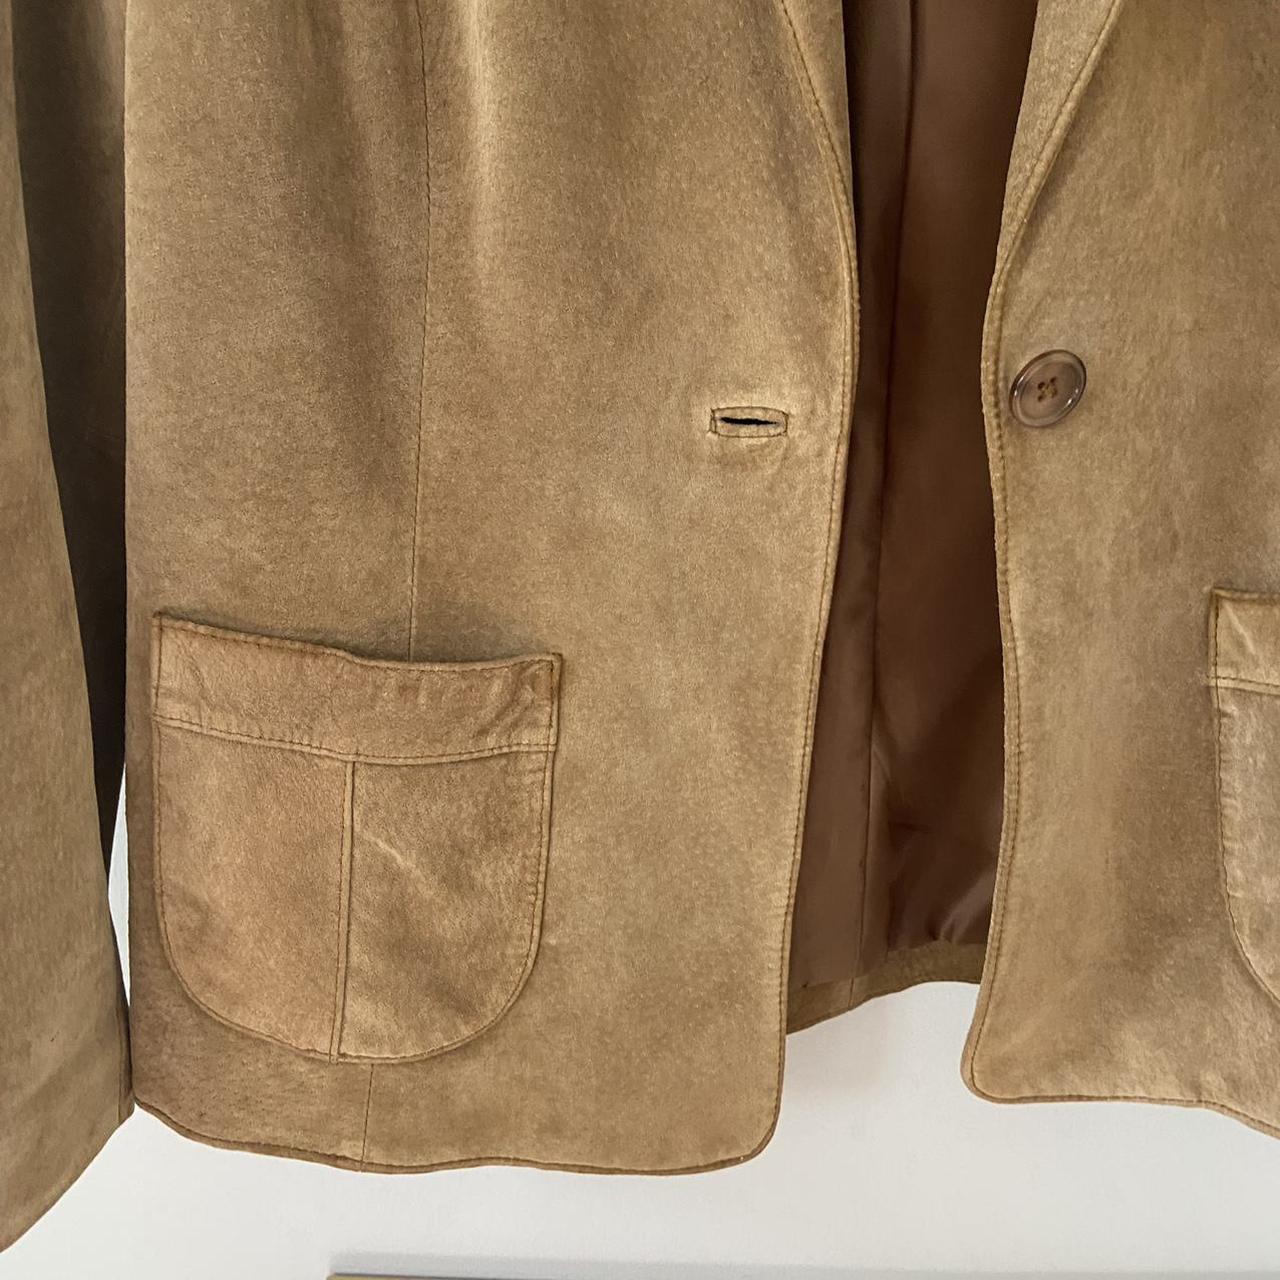 Product Image 2 - Light brown suede leather jacket.